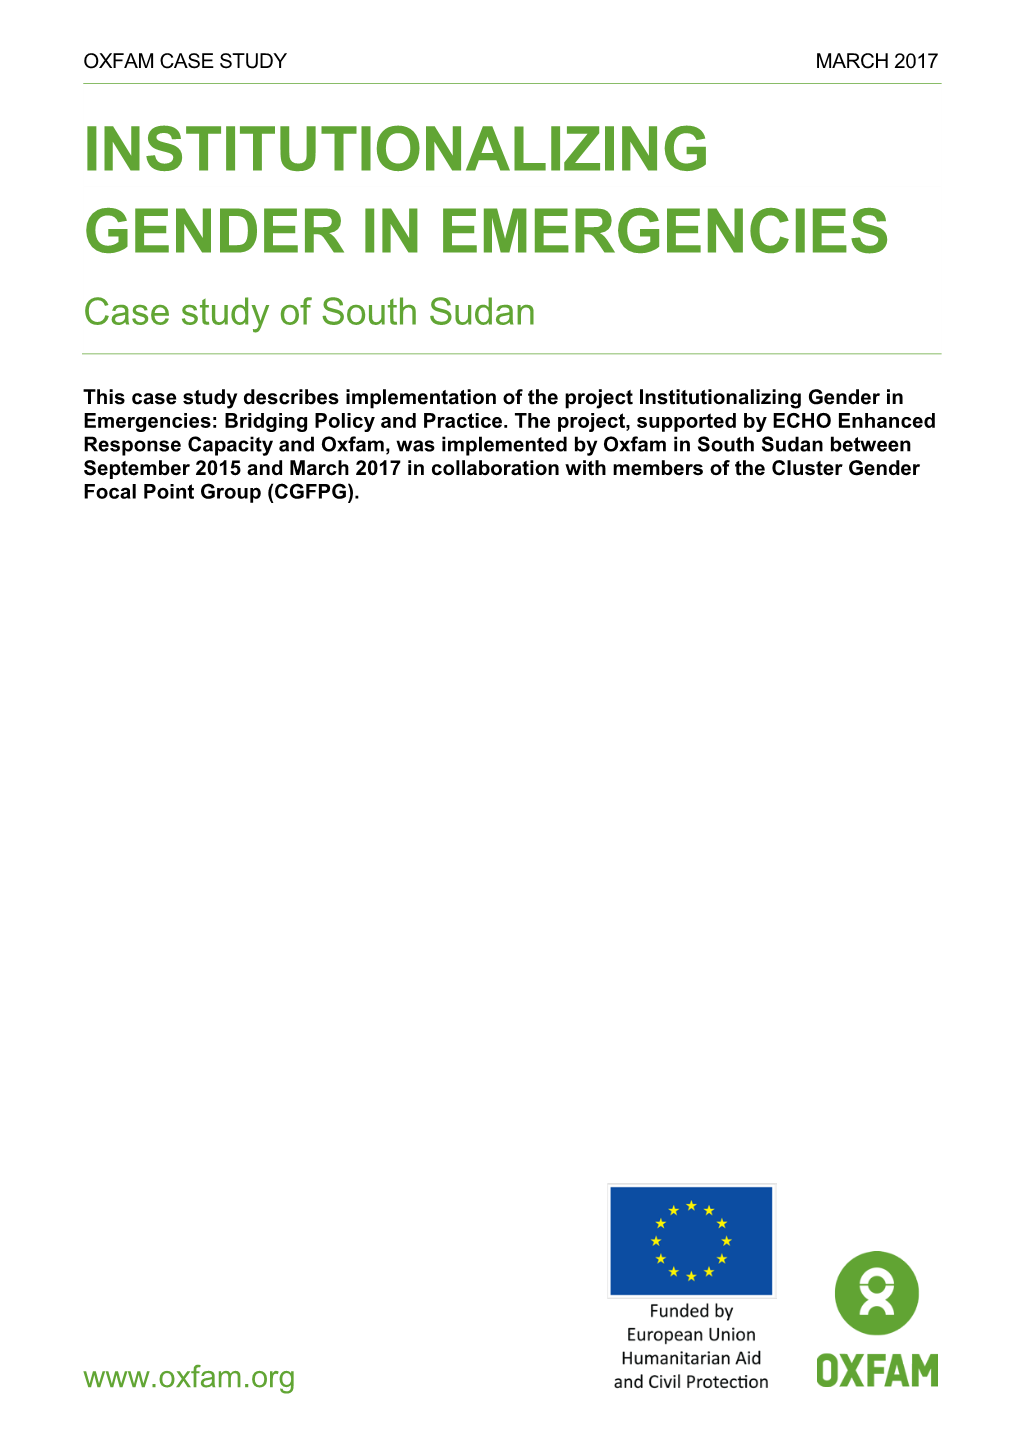 Institutionalizing Gender in Emergencies: Case Study of South